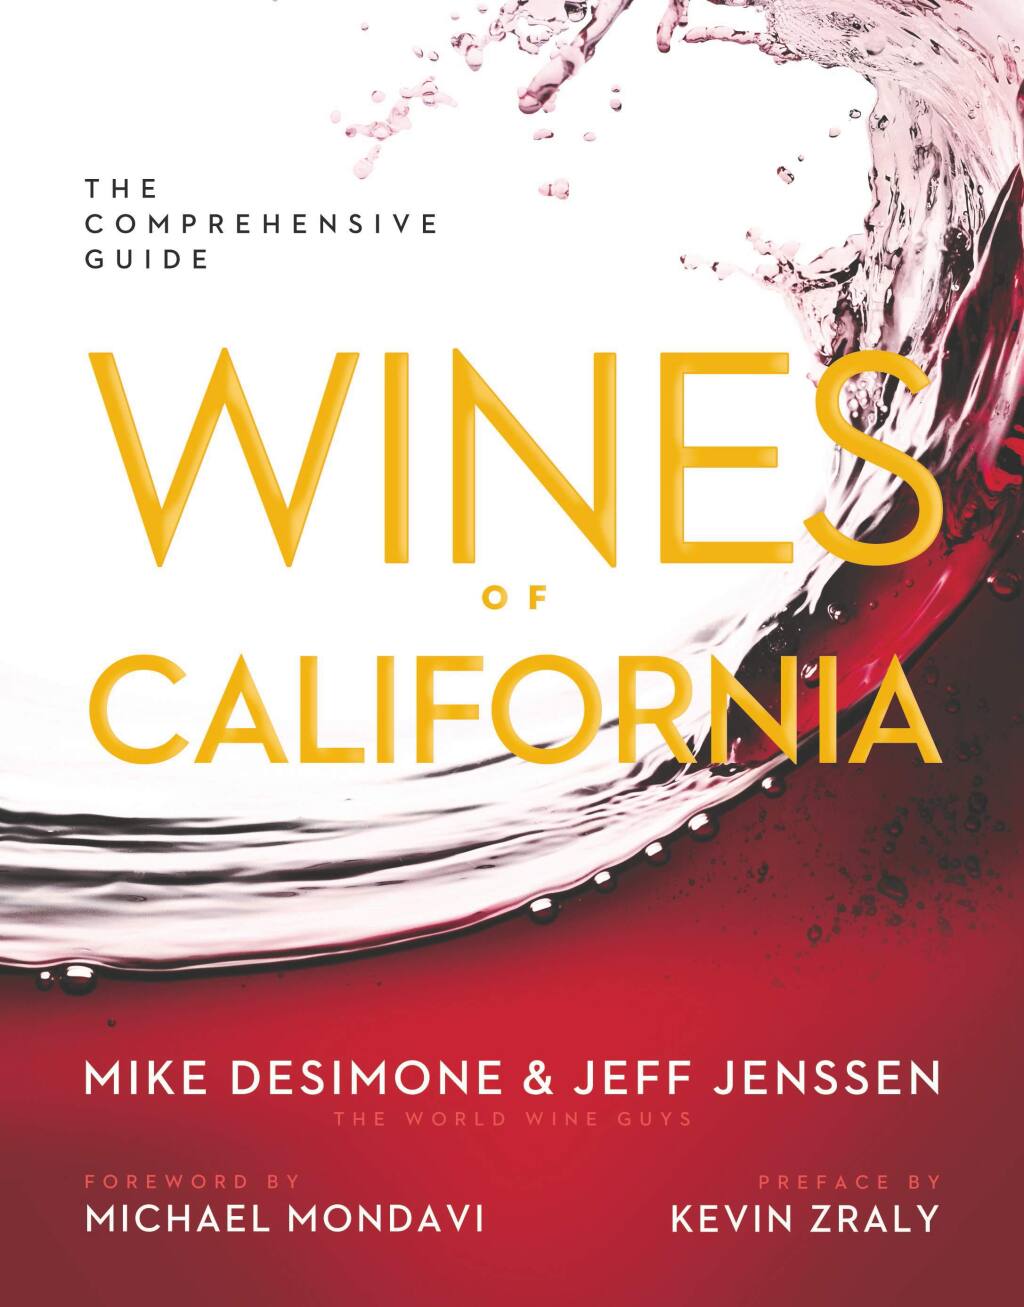 (Reprinted with permission from Wines of California © 2014 by Mike DeSimone and Jeff Jenssen, Sterling Epicure, an imprint of Sterling Publishing Co., IncThe Comprehensive Guide Wines of California wine book.)